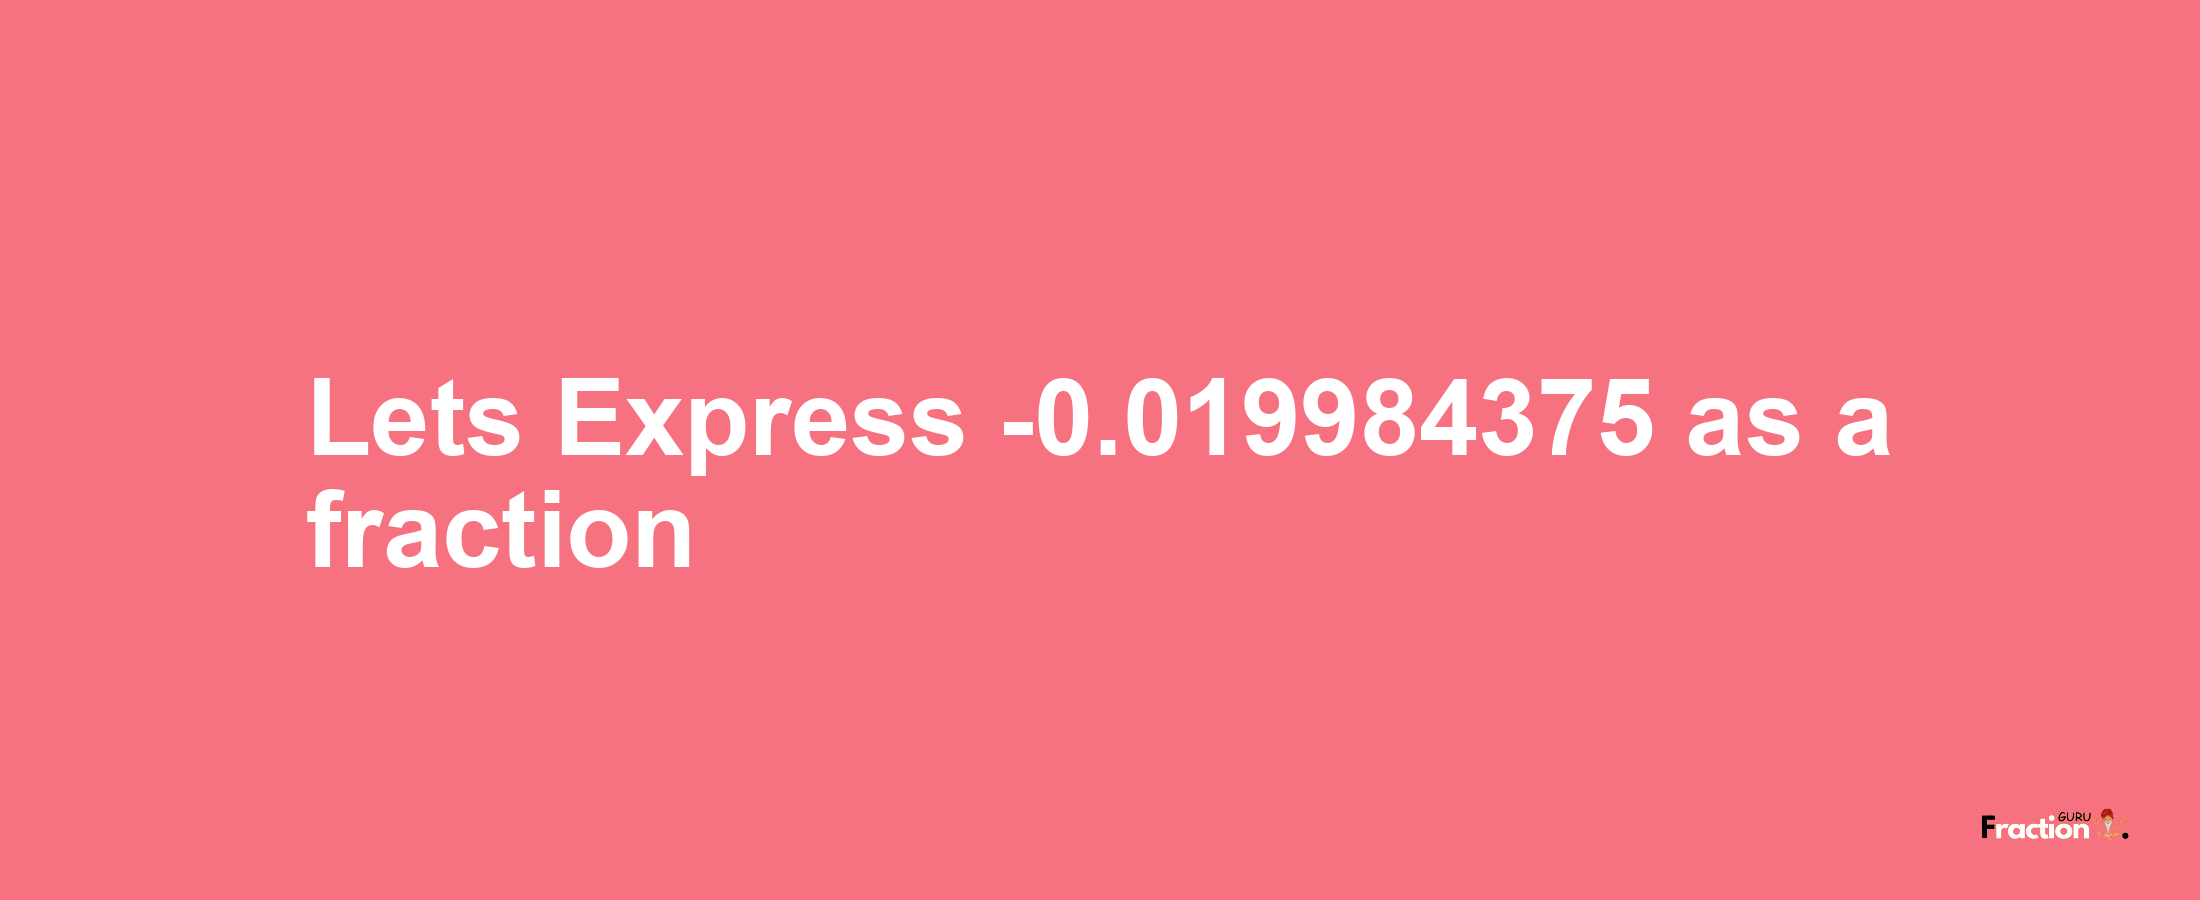 Lets Express -0.019984375 as afraction